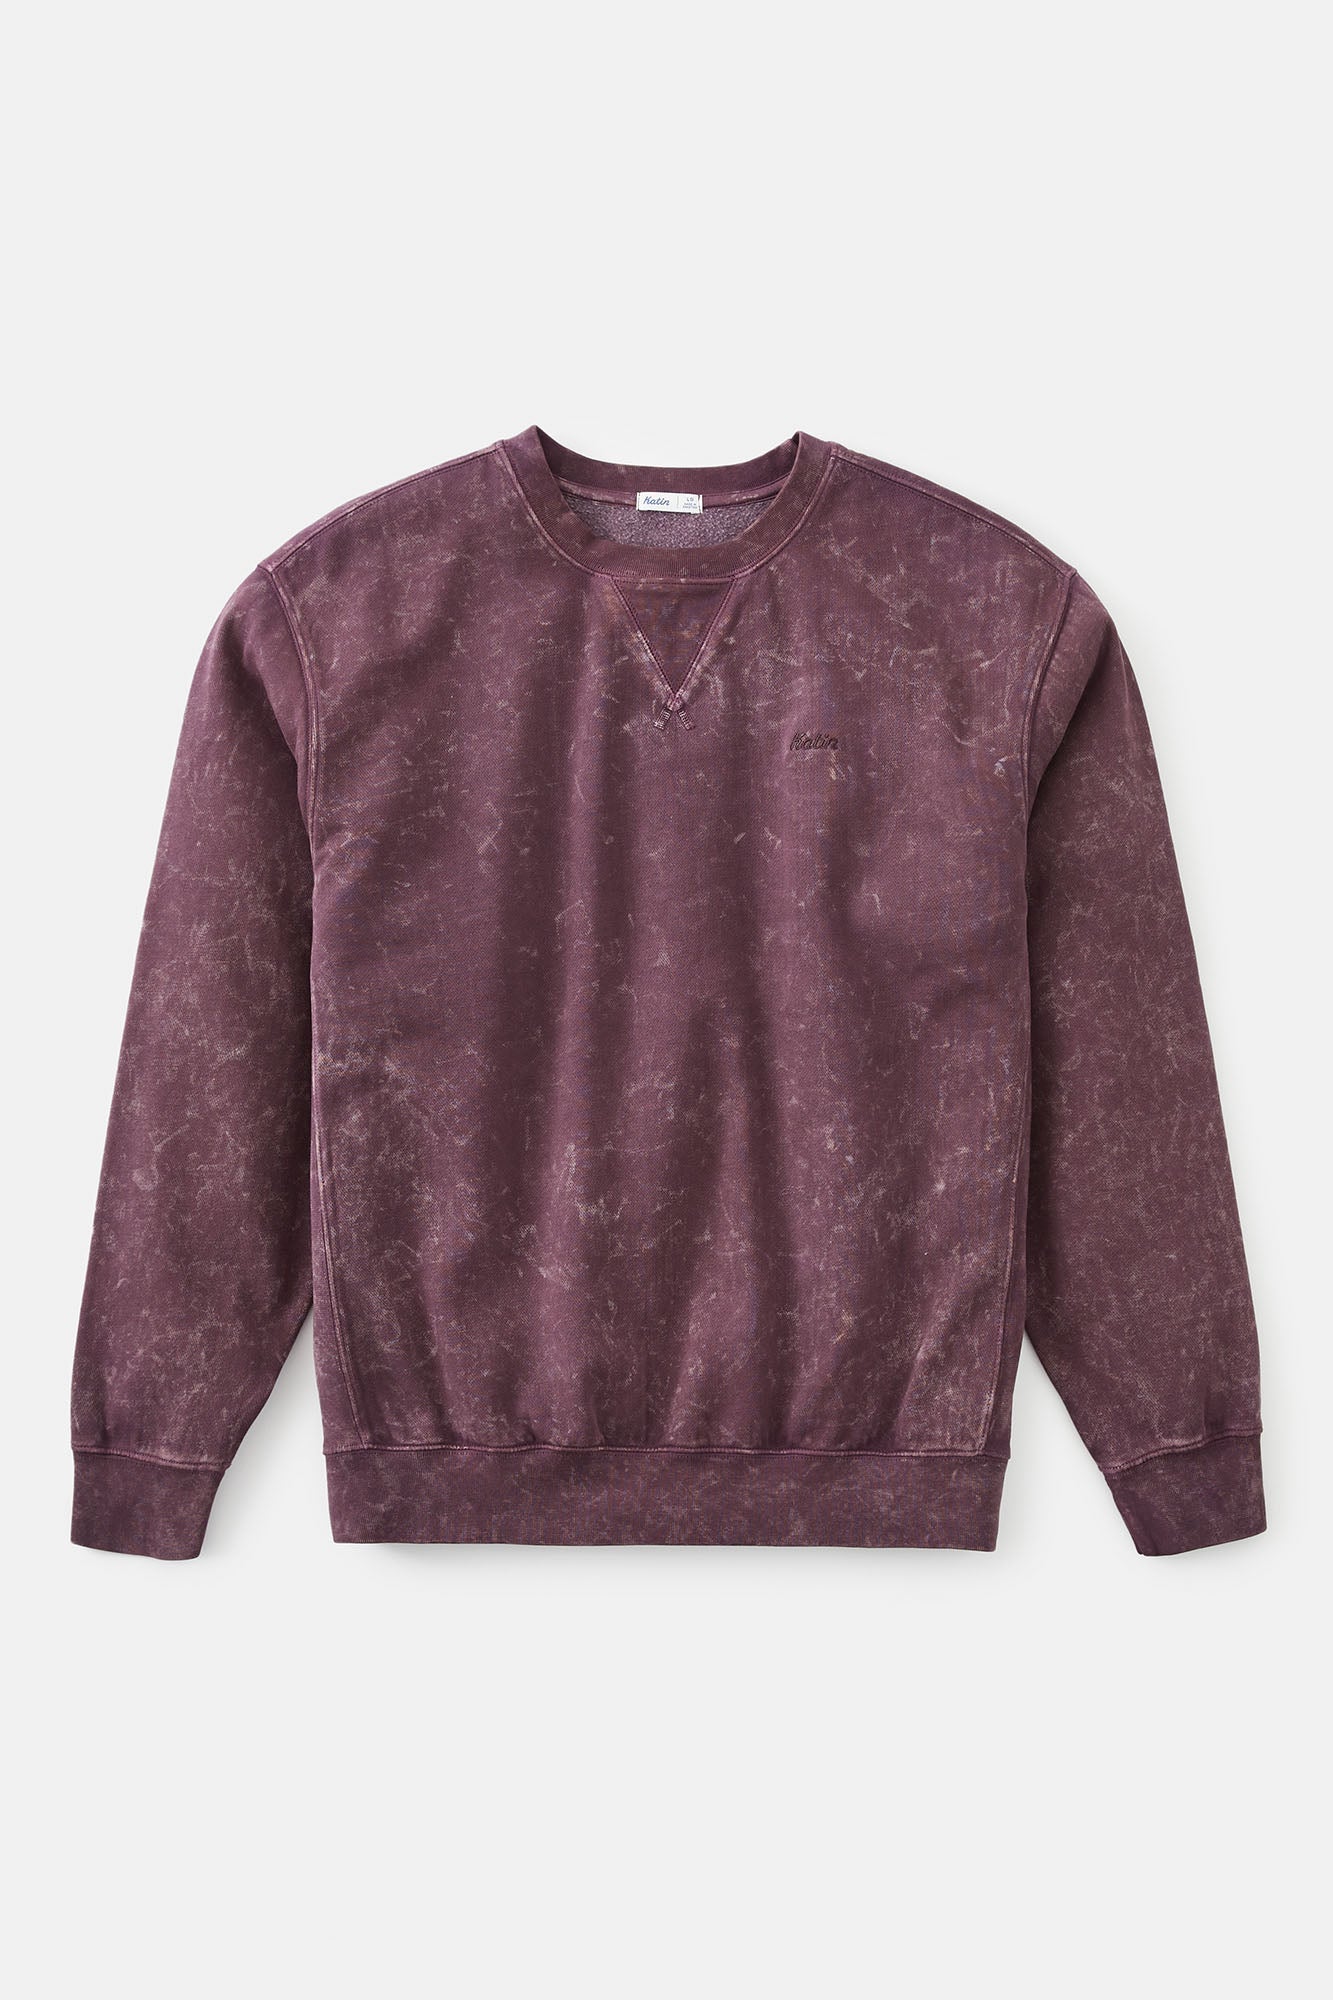 Katin Embroidered Solid Crew Neck Sweatshirt - Kelp red Mineral stock